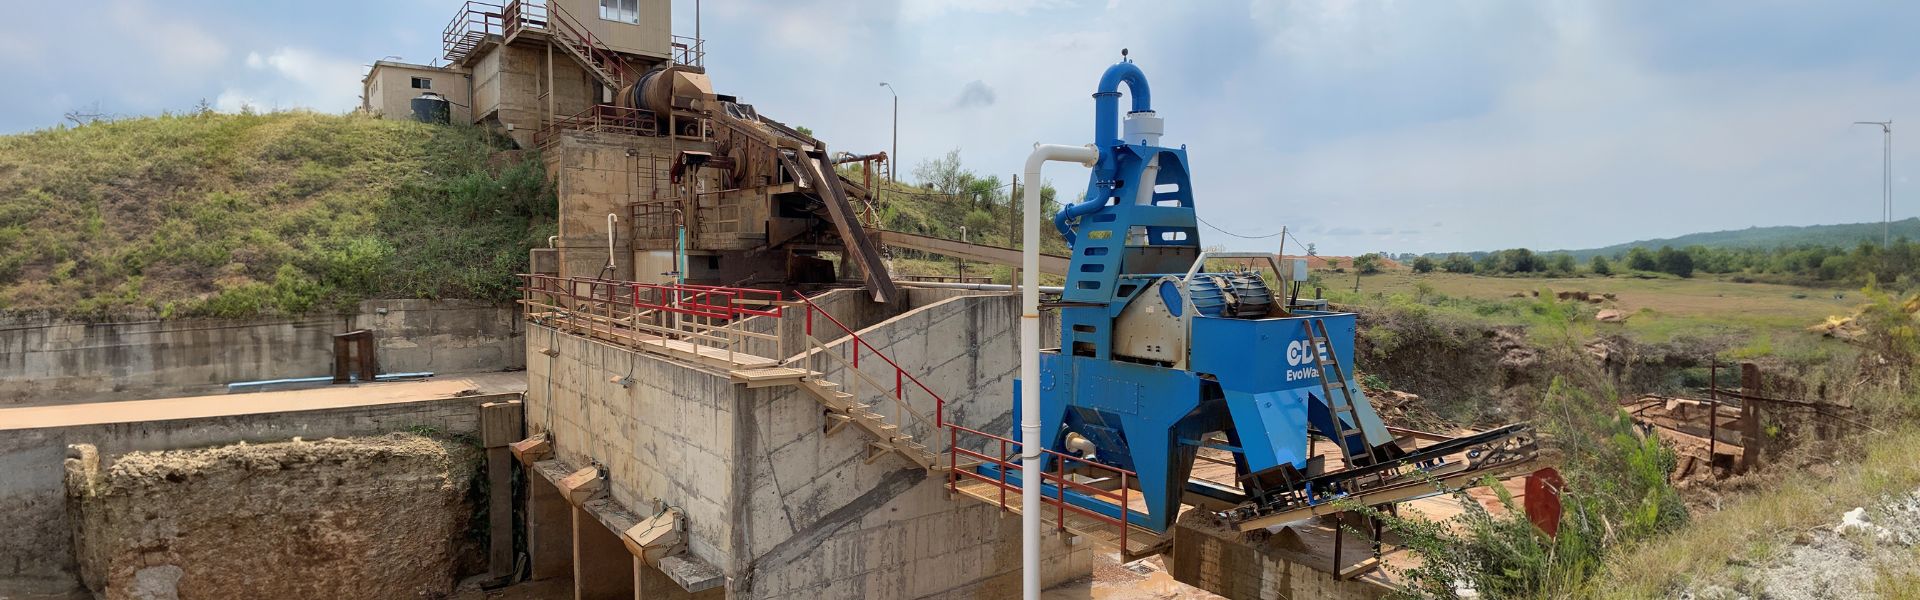 Bisio Hnos S.A. modernise operations with state-of-the-art sand washing plant.